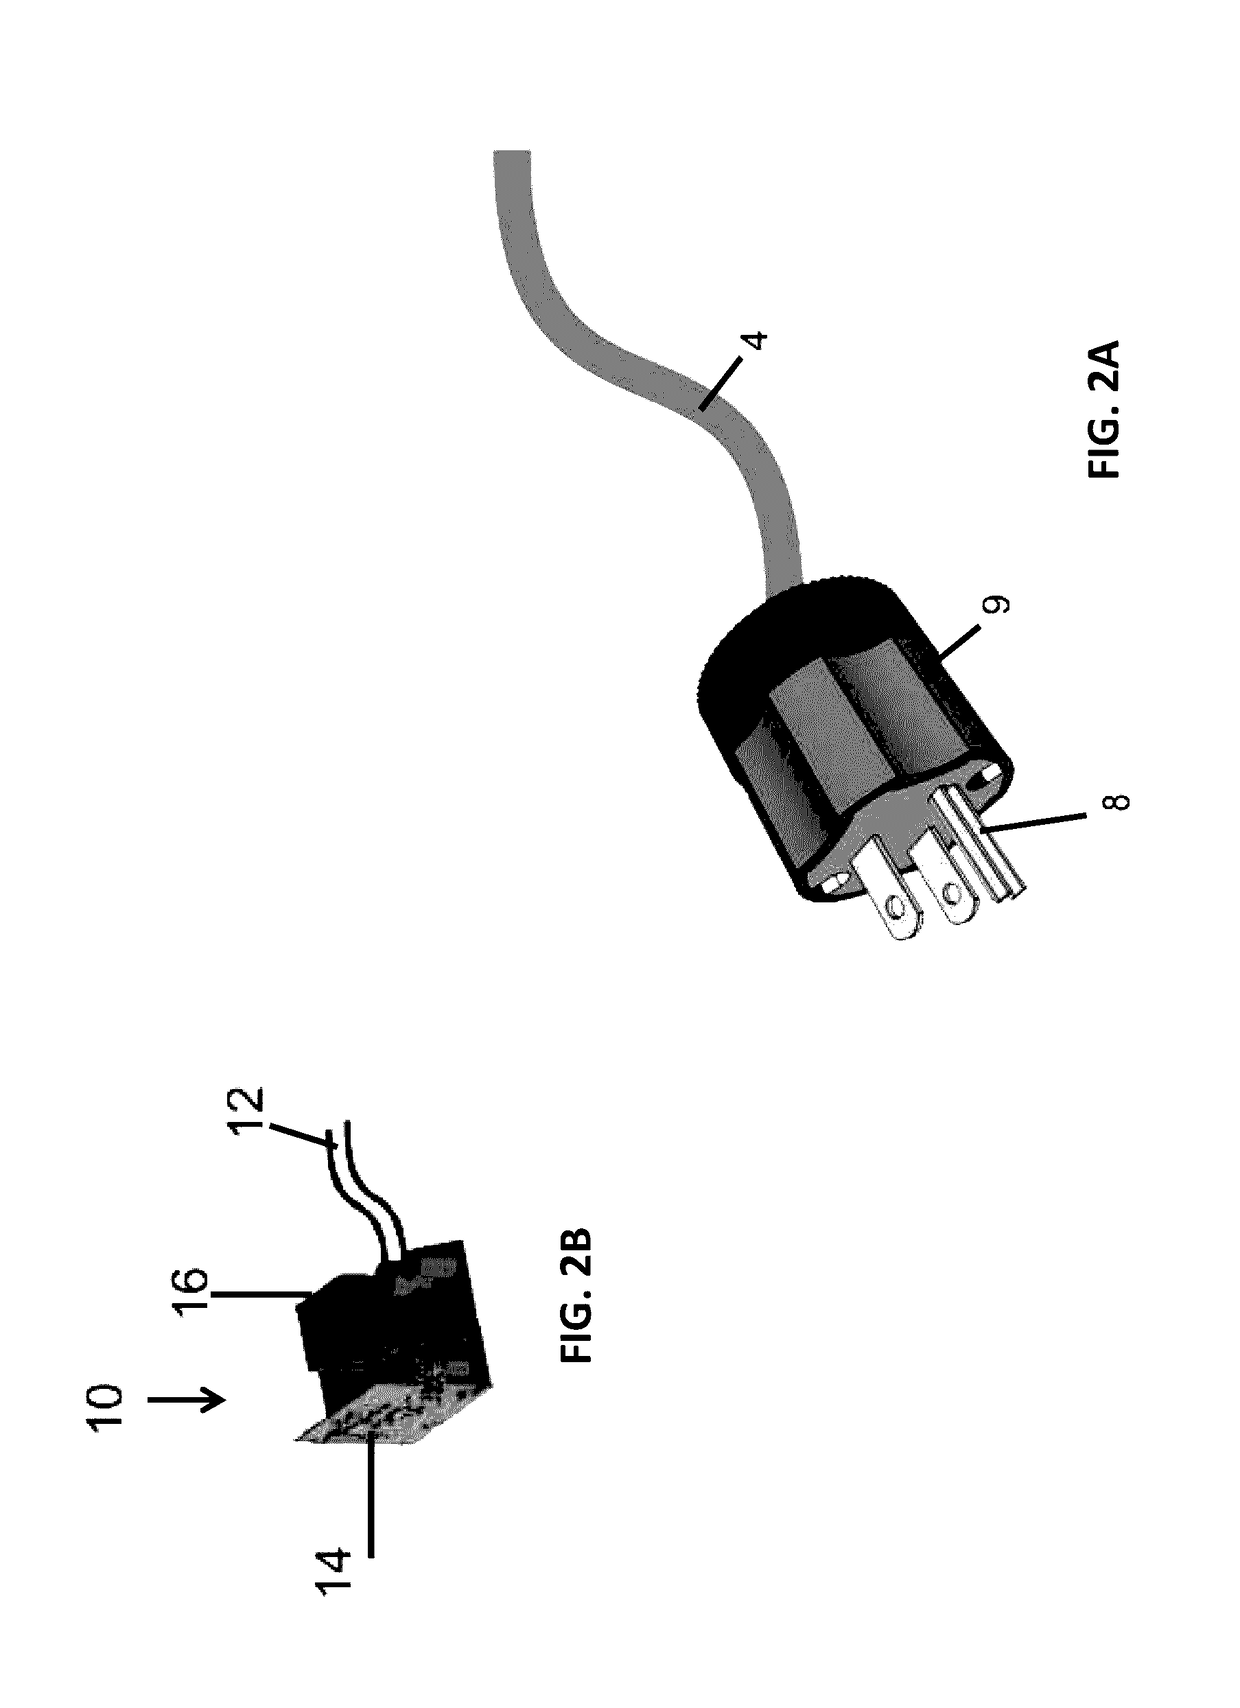 Systems and methods for communication between devices and remote systems with a power cord